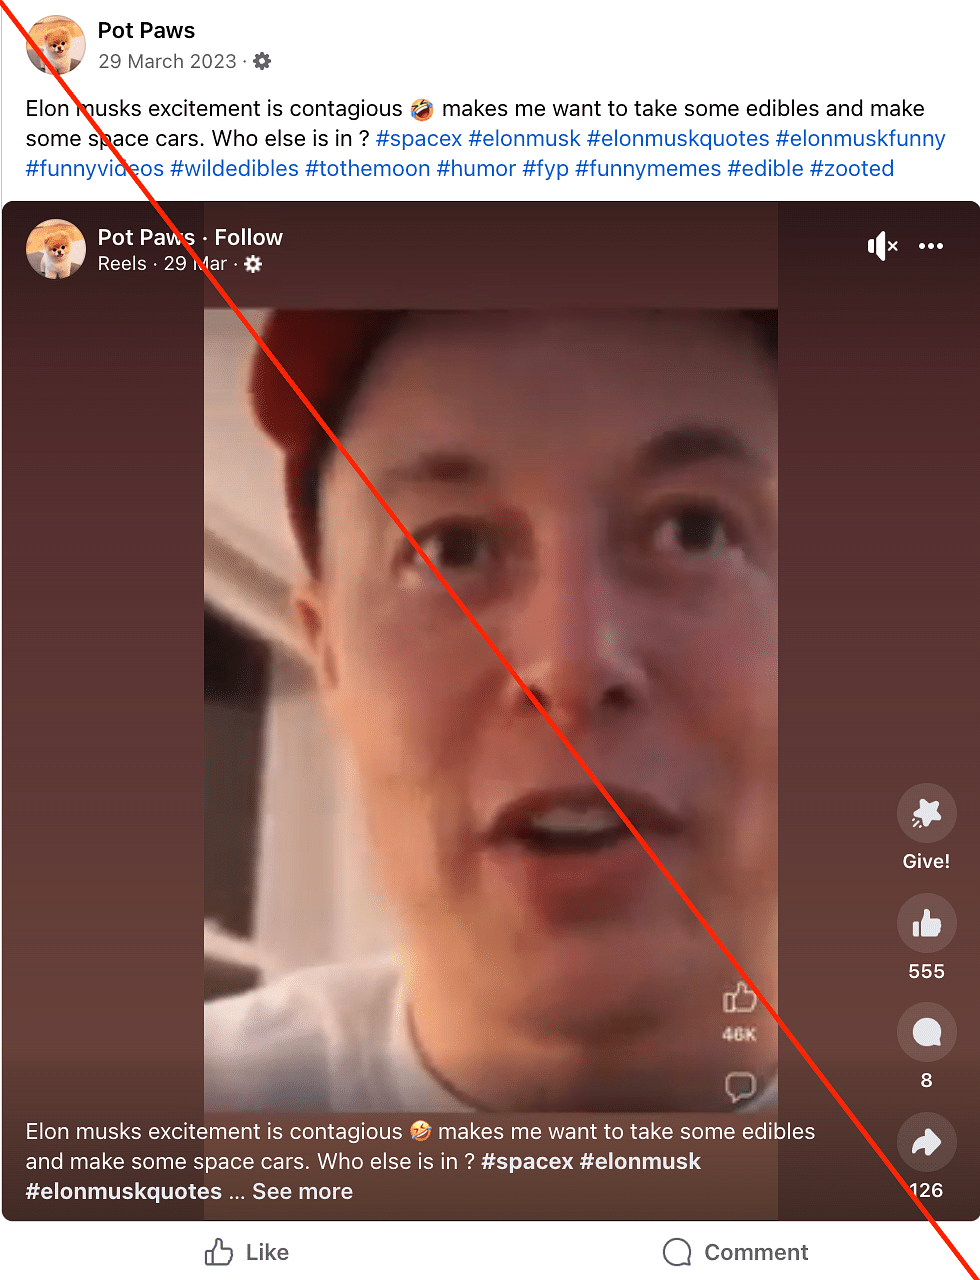 The video does not show Elon Musk talking about going to Mars, it is a deepfake.